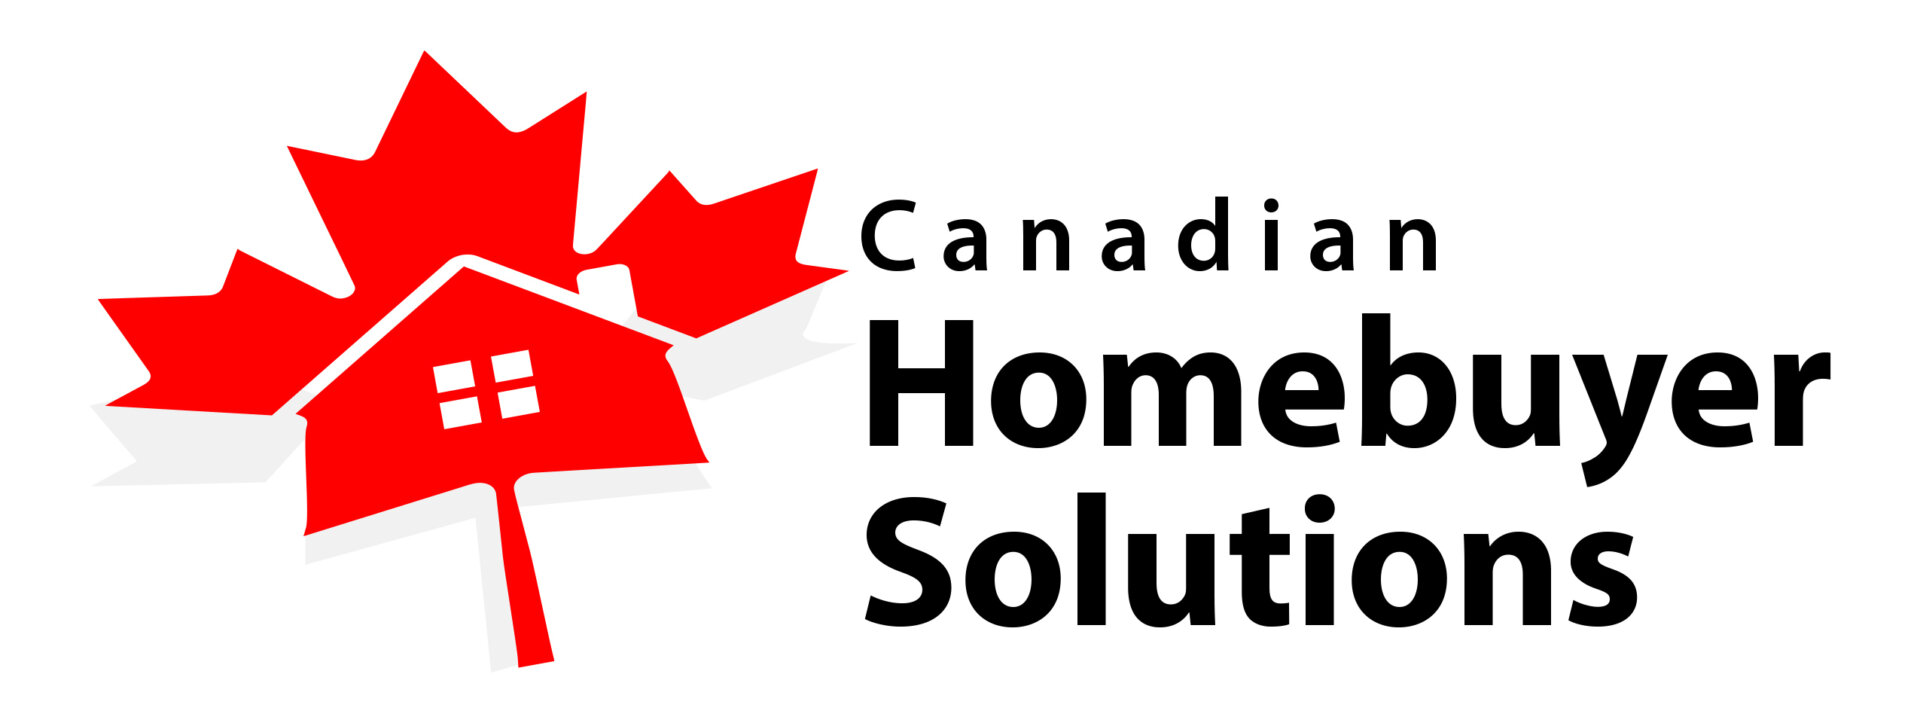 Canadian Home Buyer Solutions logo